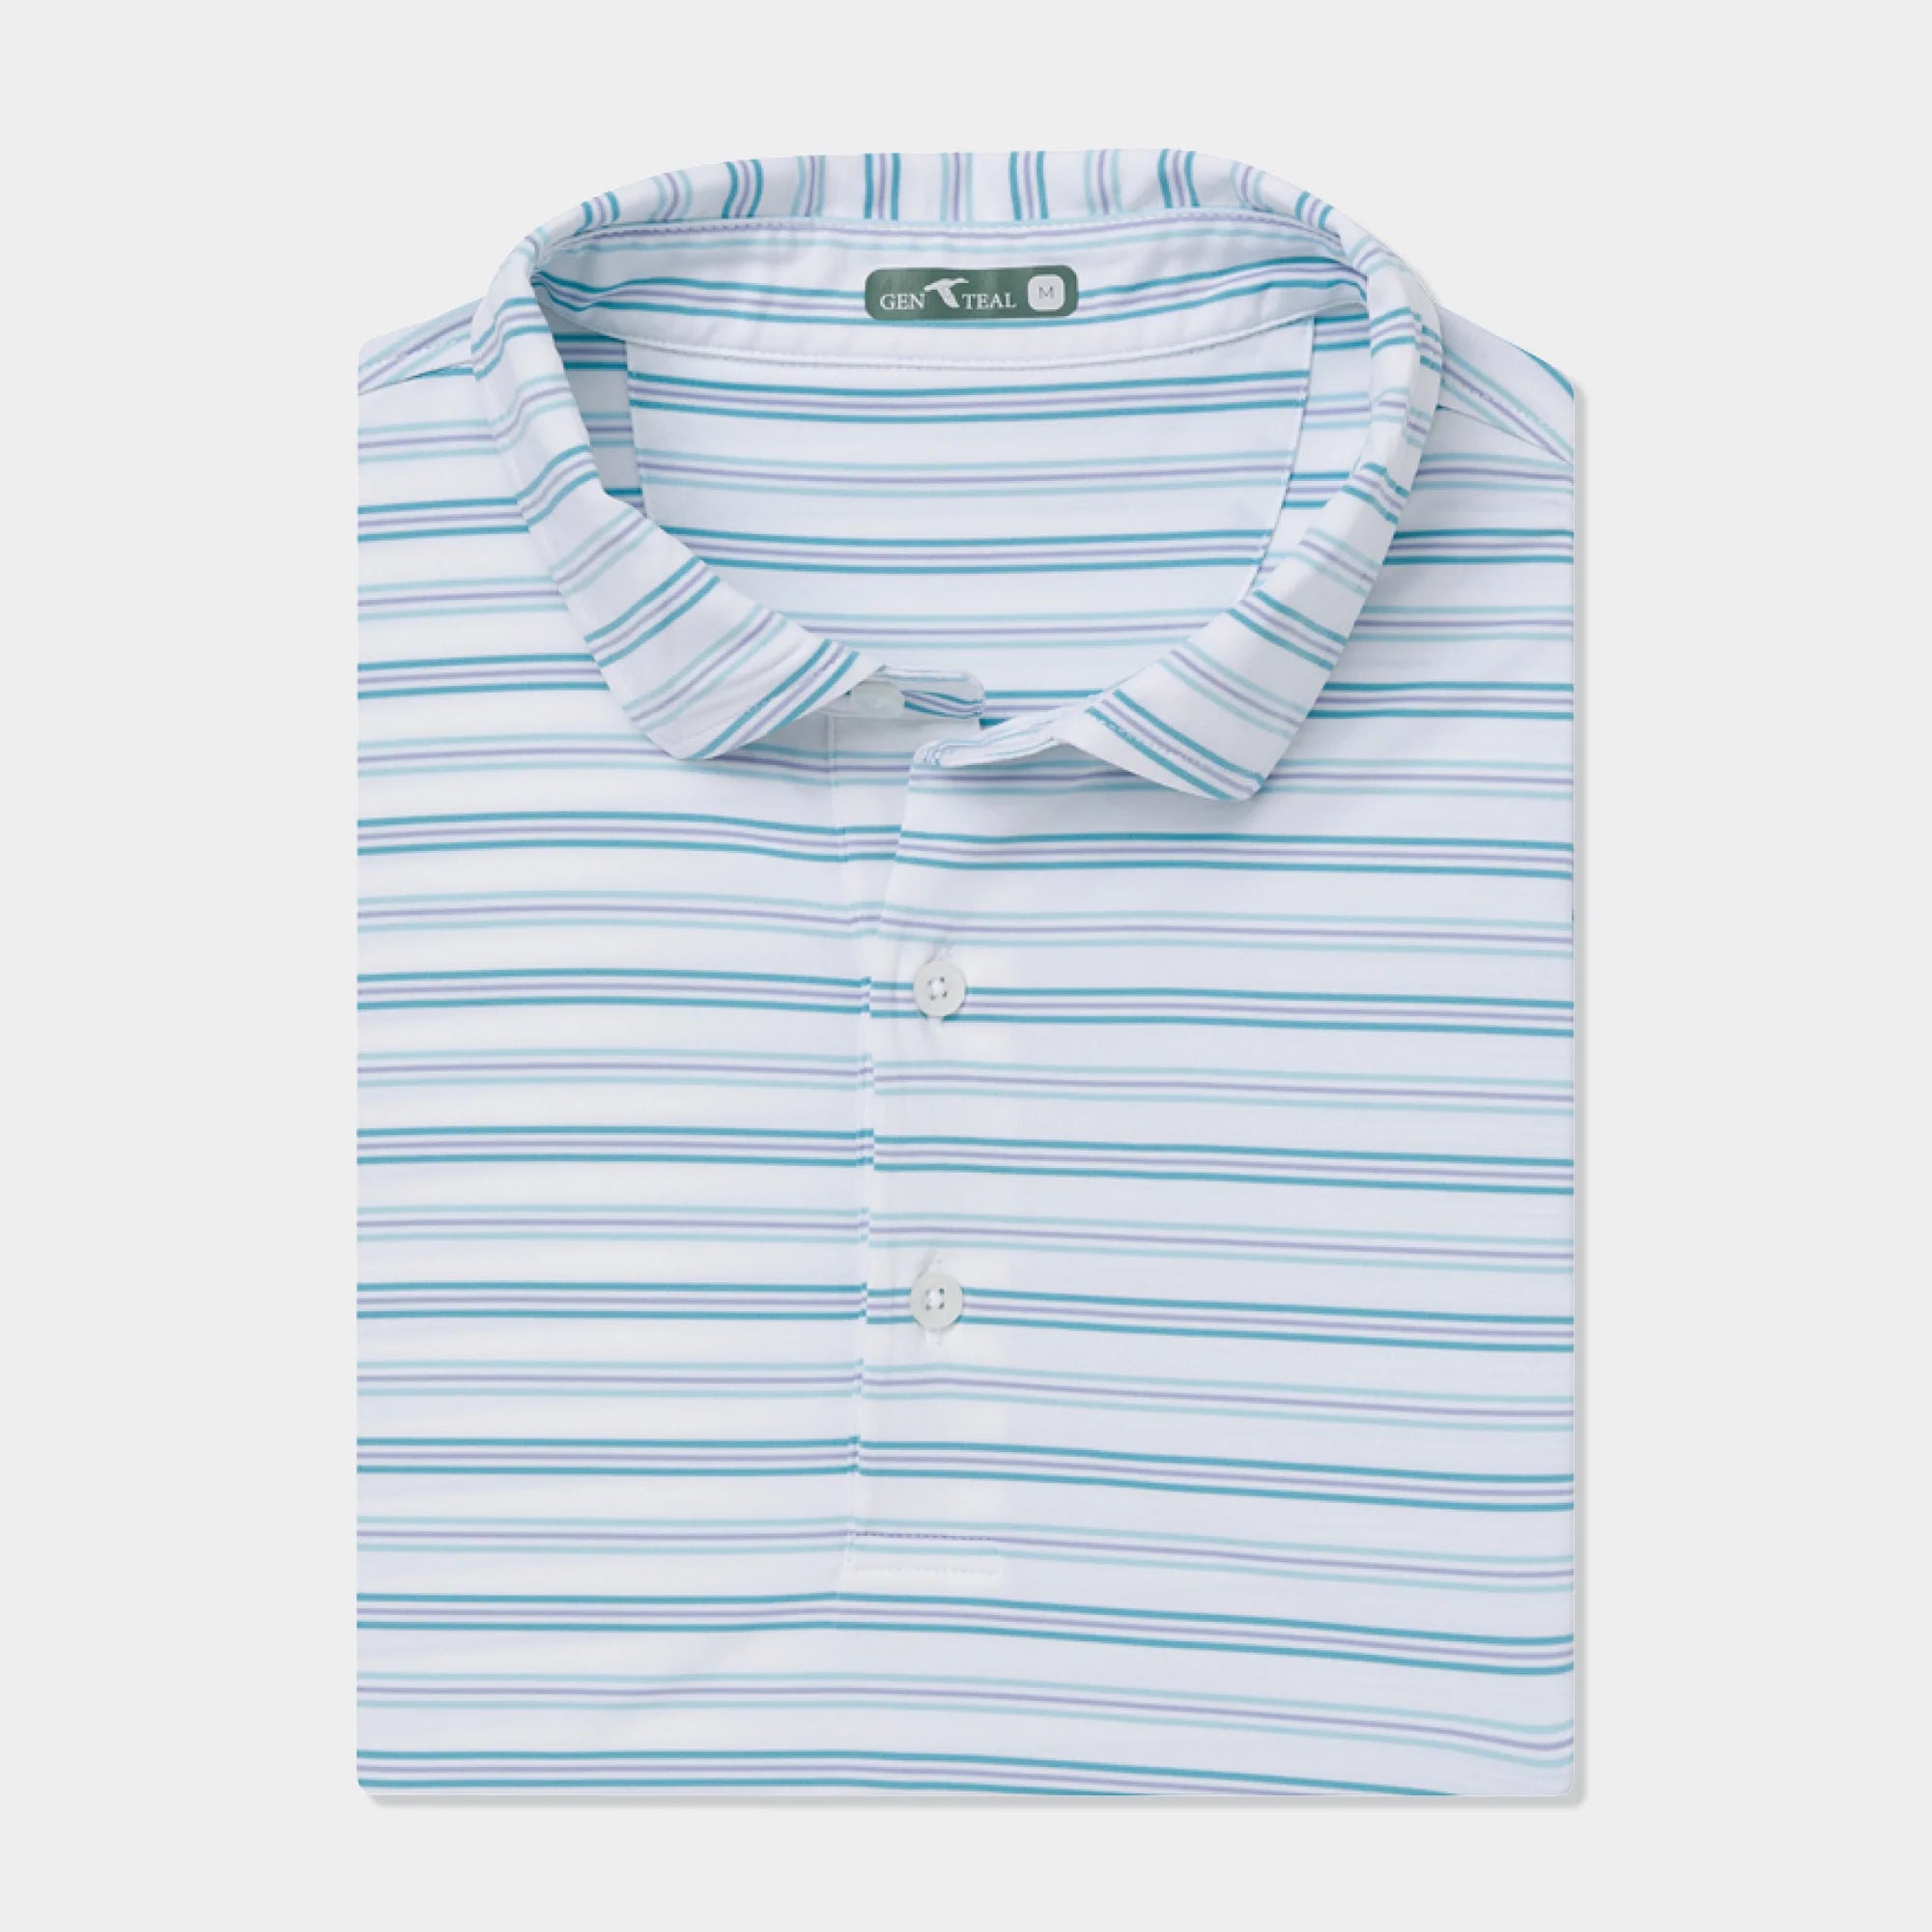 GENTEAL Men's Polo JADEITE / S Genteal Topsail Ecosoft Polo || David's Clothing 4070391